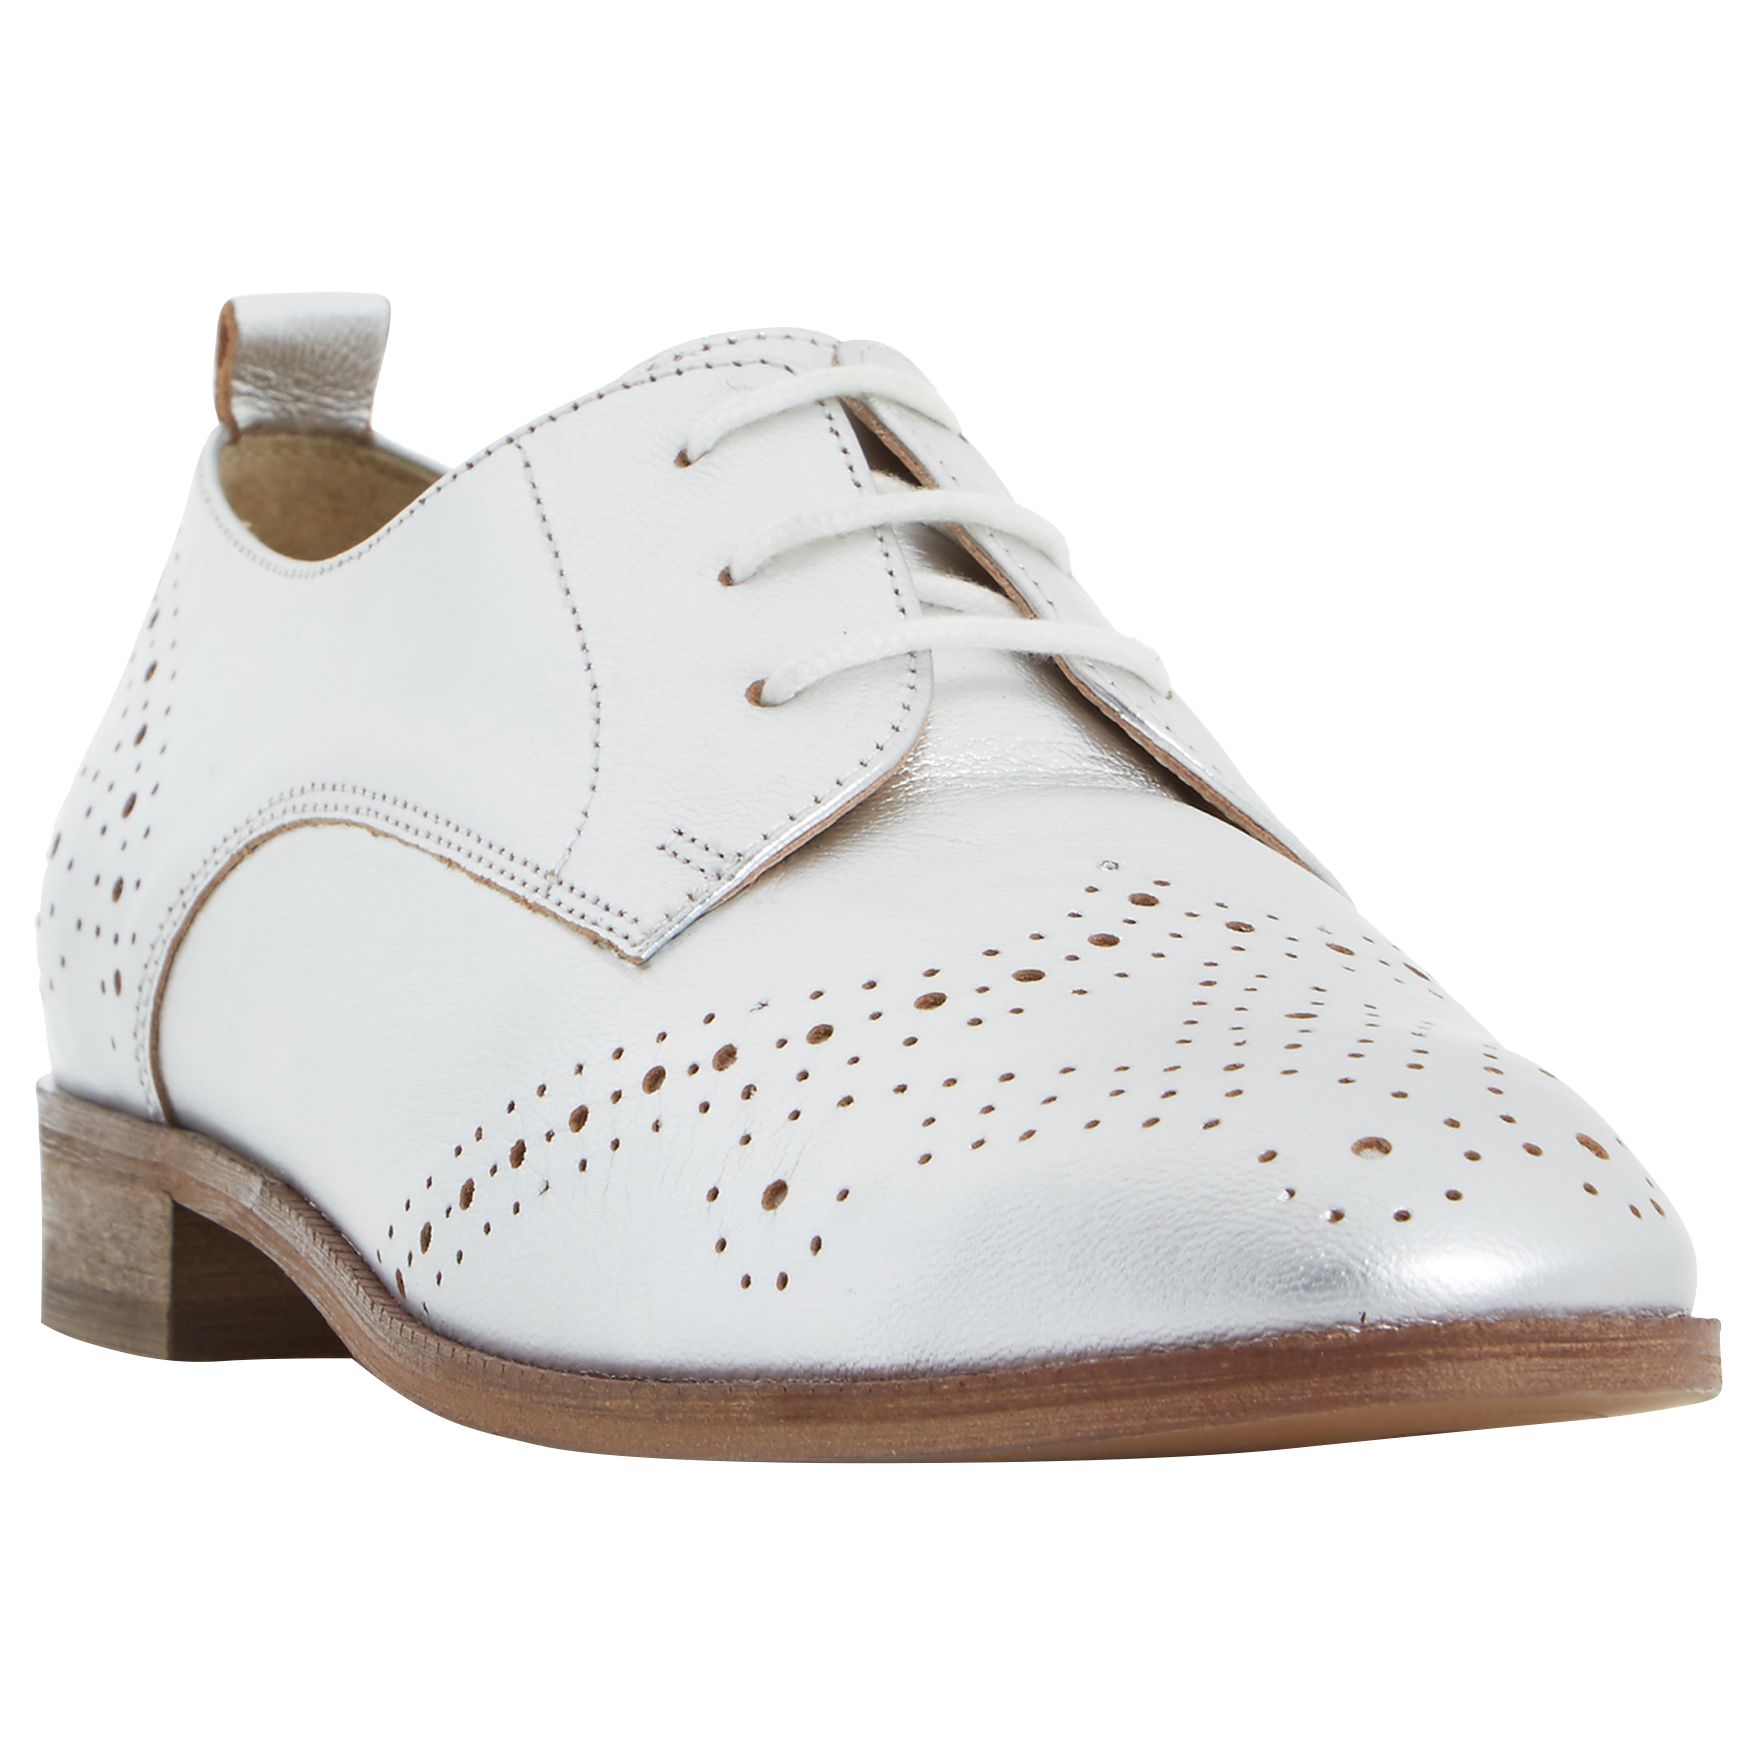 Dune Foster Lace Up Leather Brogues, Silver, 5